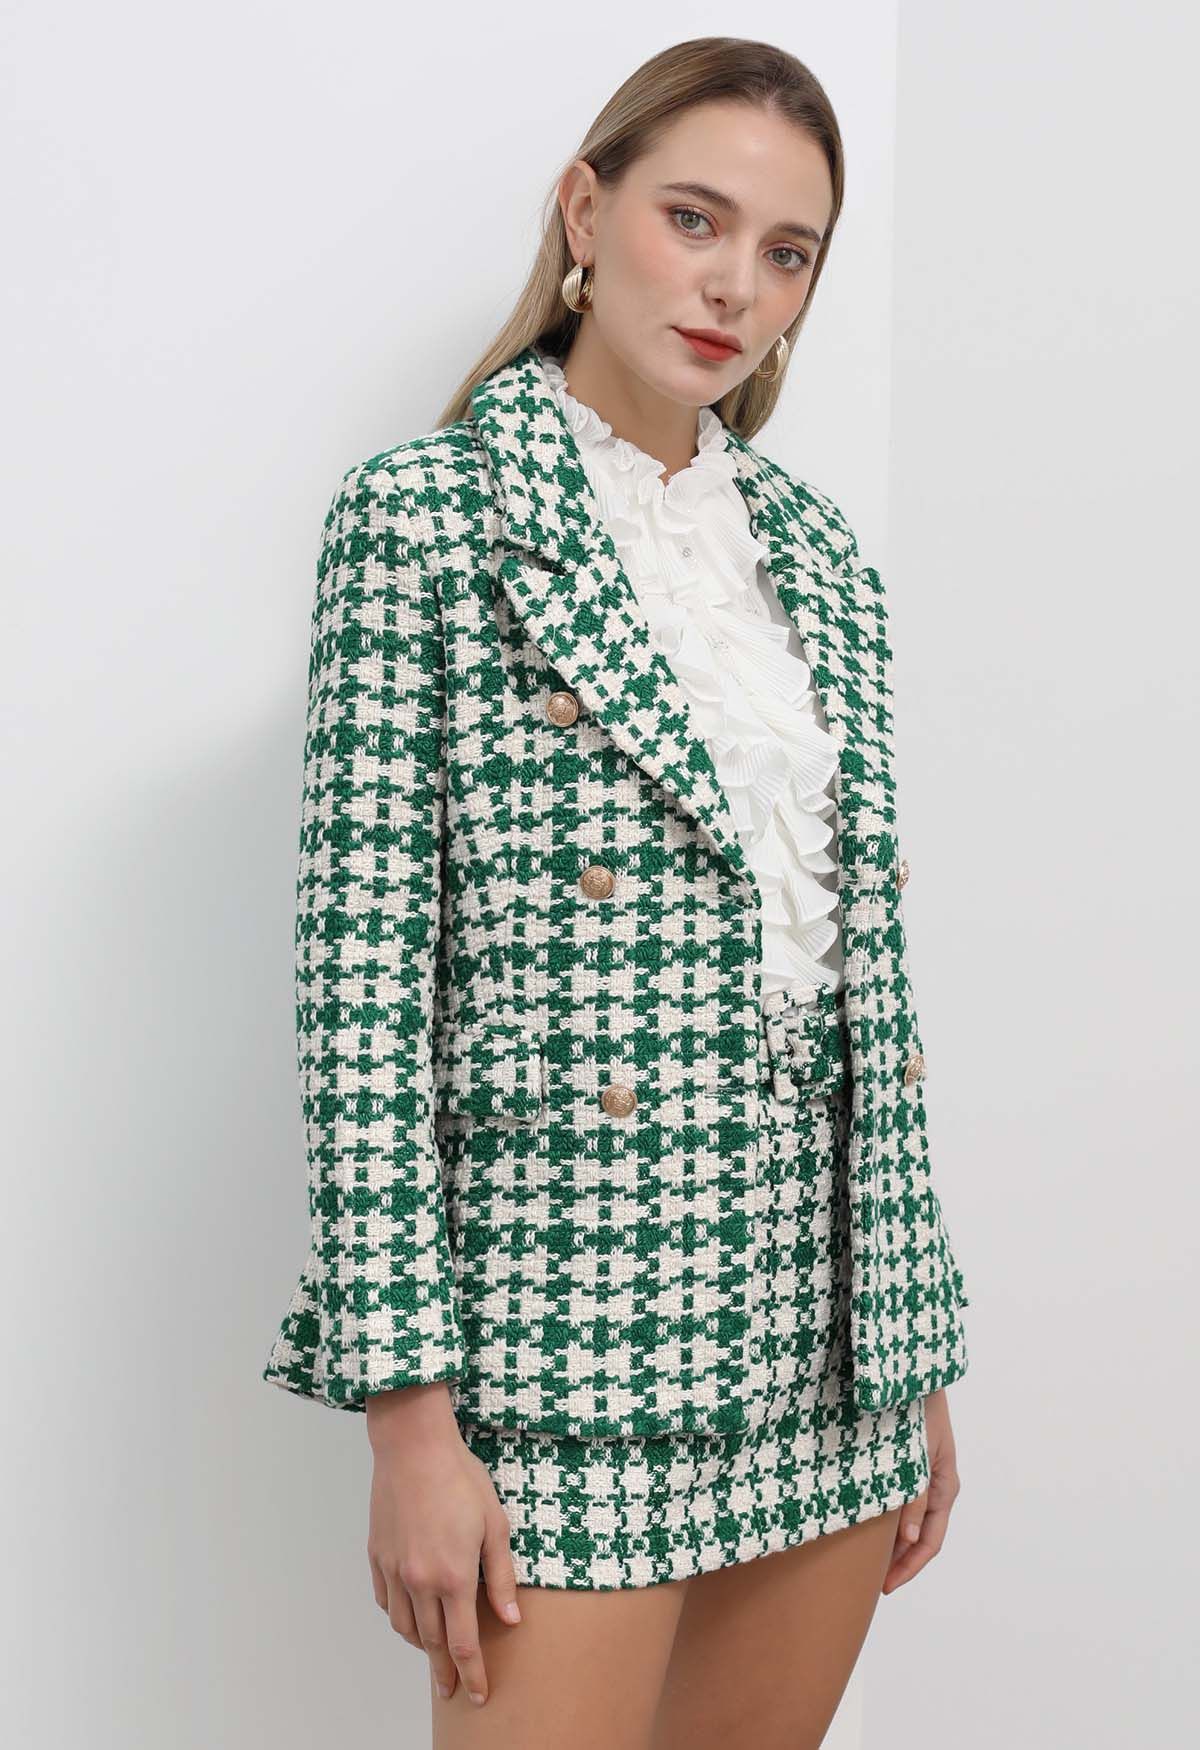 Lush Houndstooth Tweed Double-Breasted Blazer